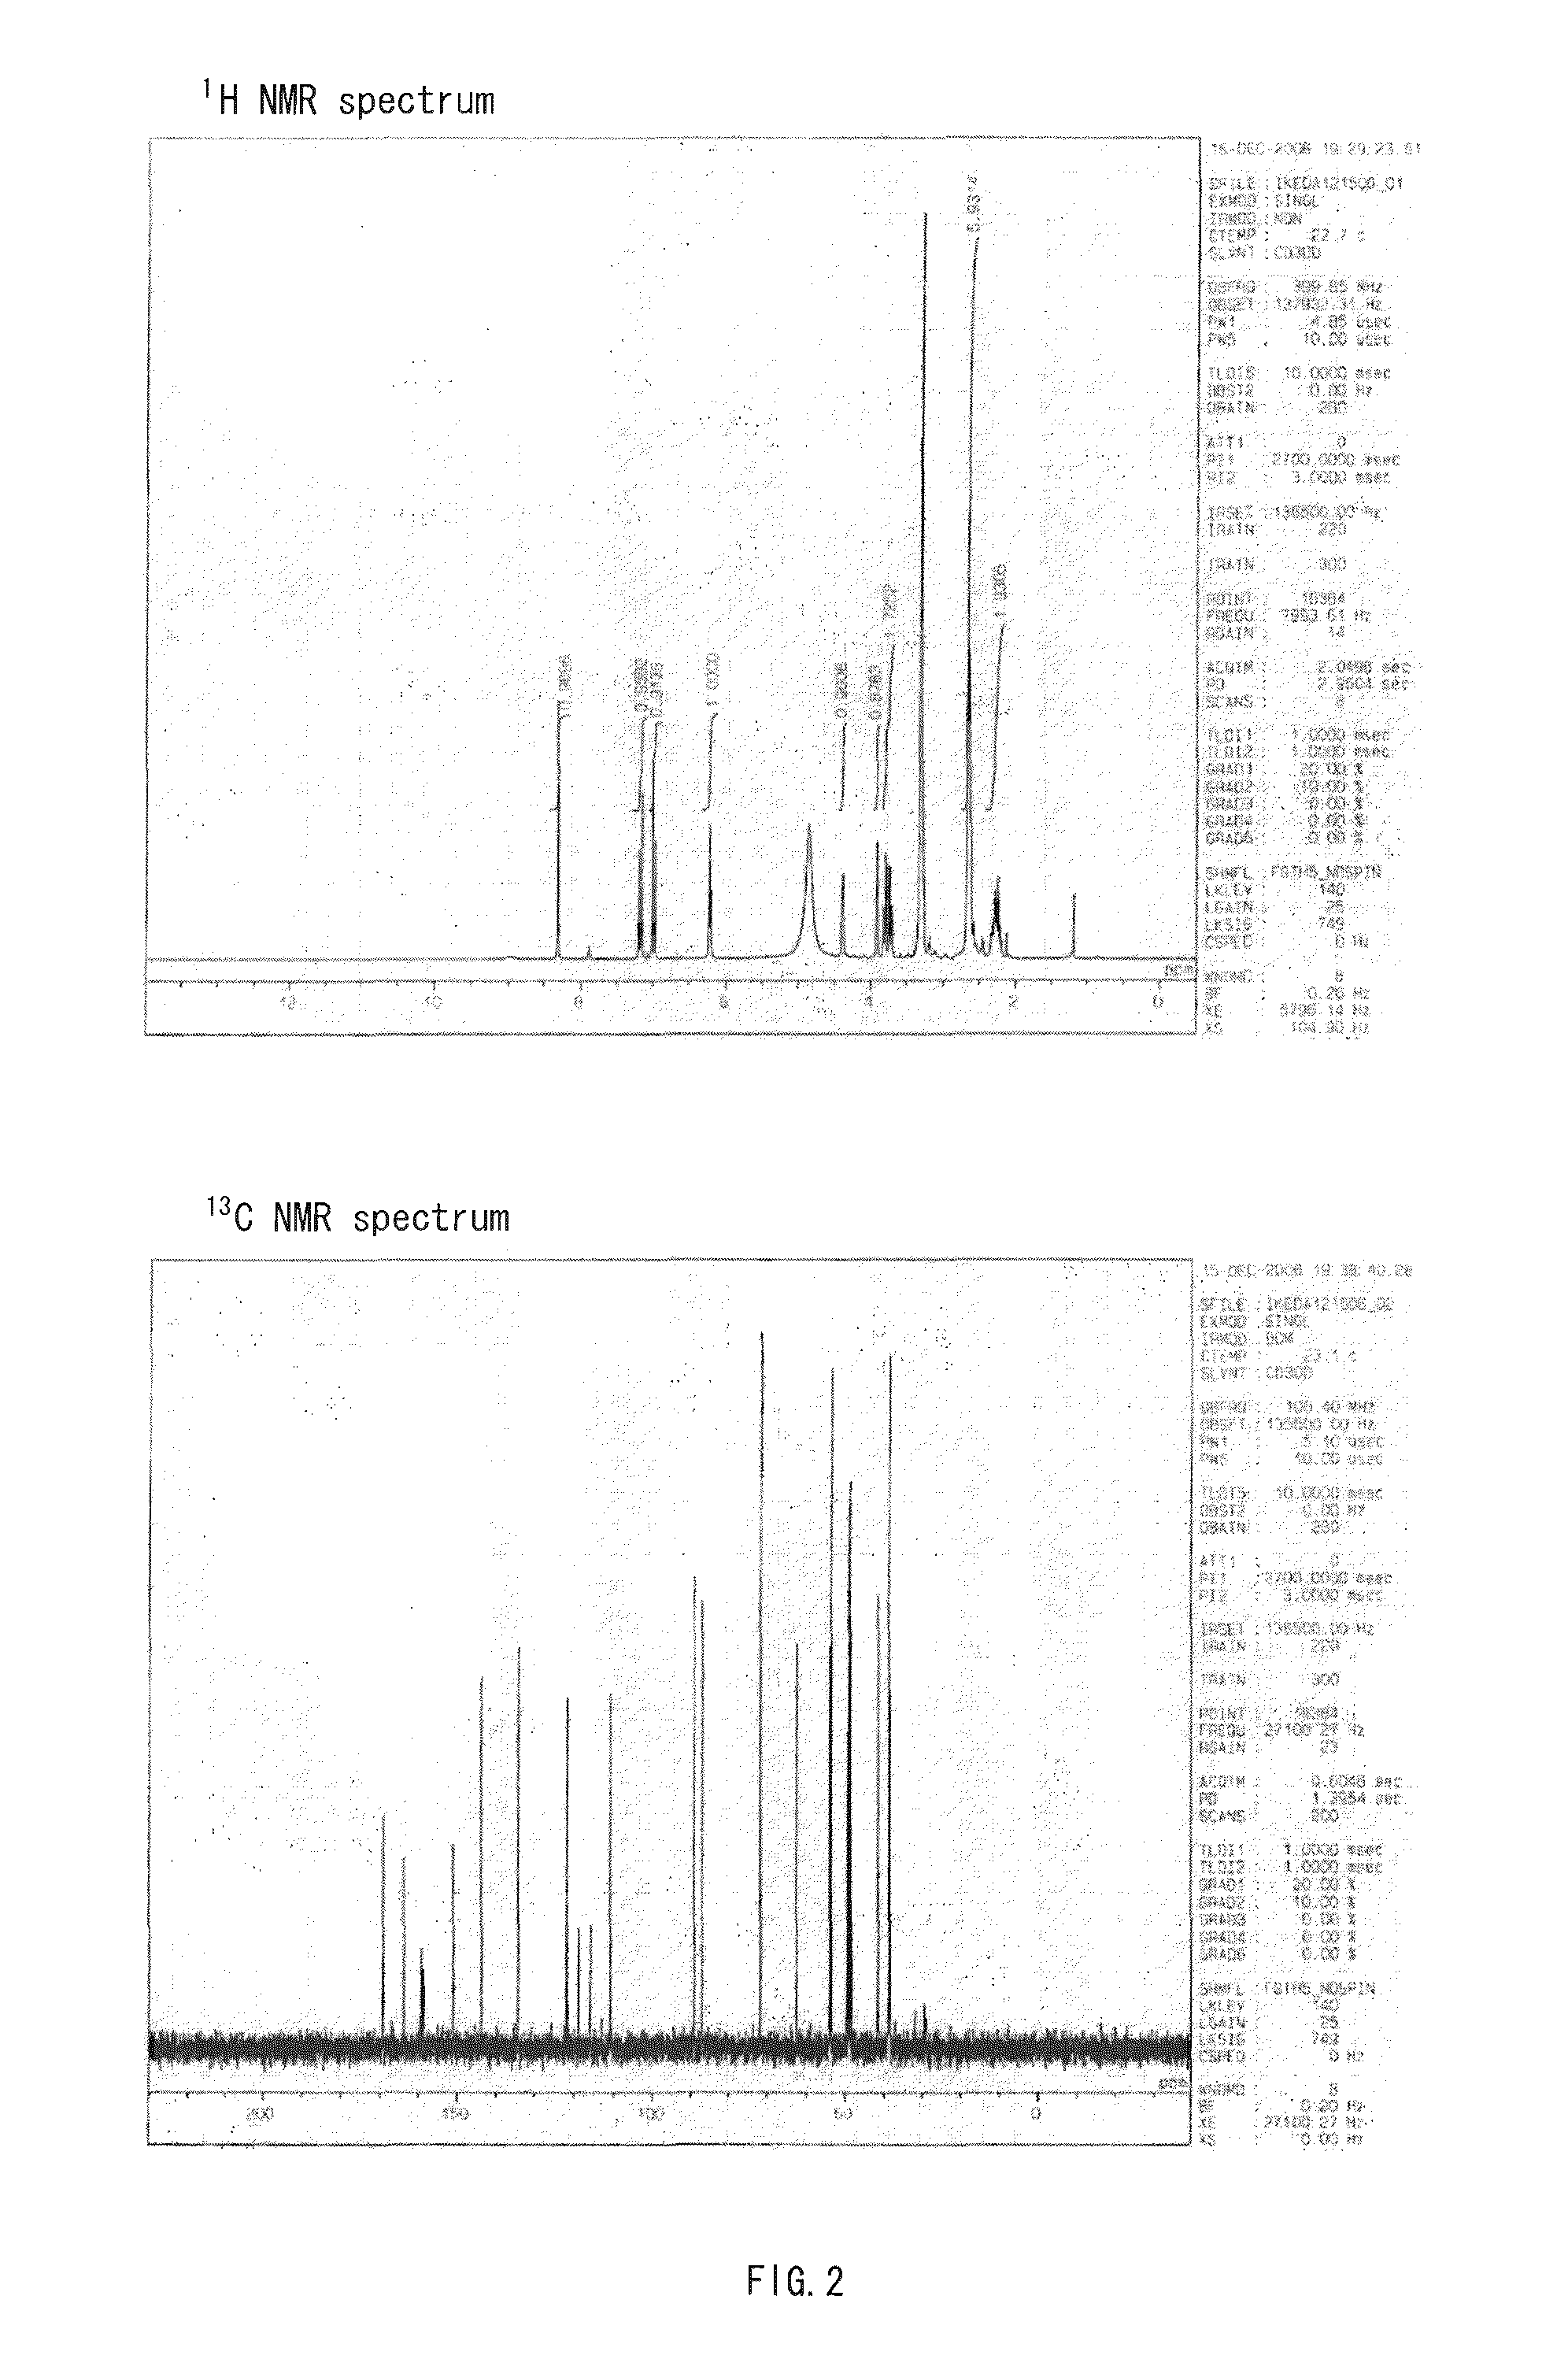 Compound having structure derived from mononucleoside or mononucleotide, nucleic acid, labeling substance, and method and kit for detection of nucleic acid